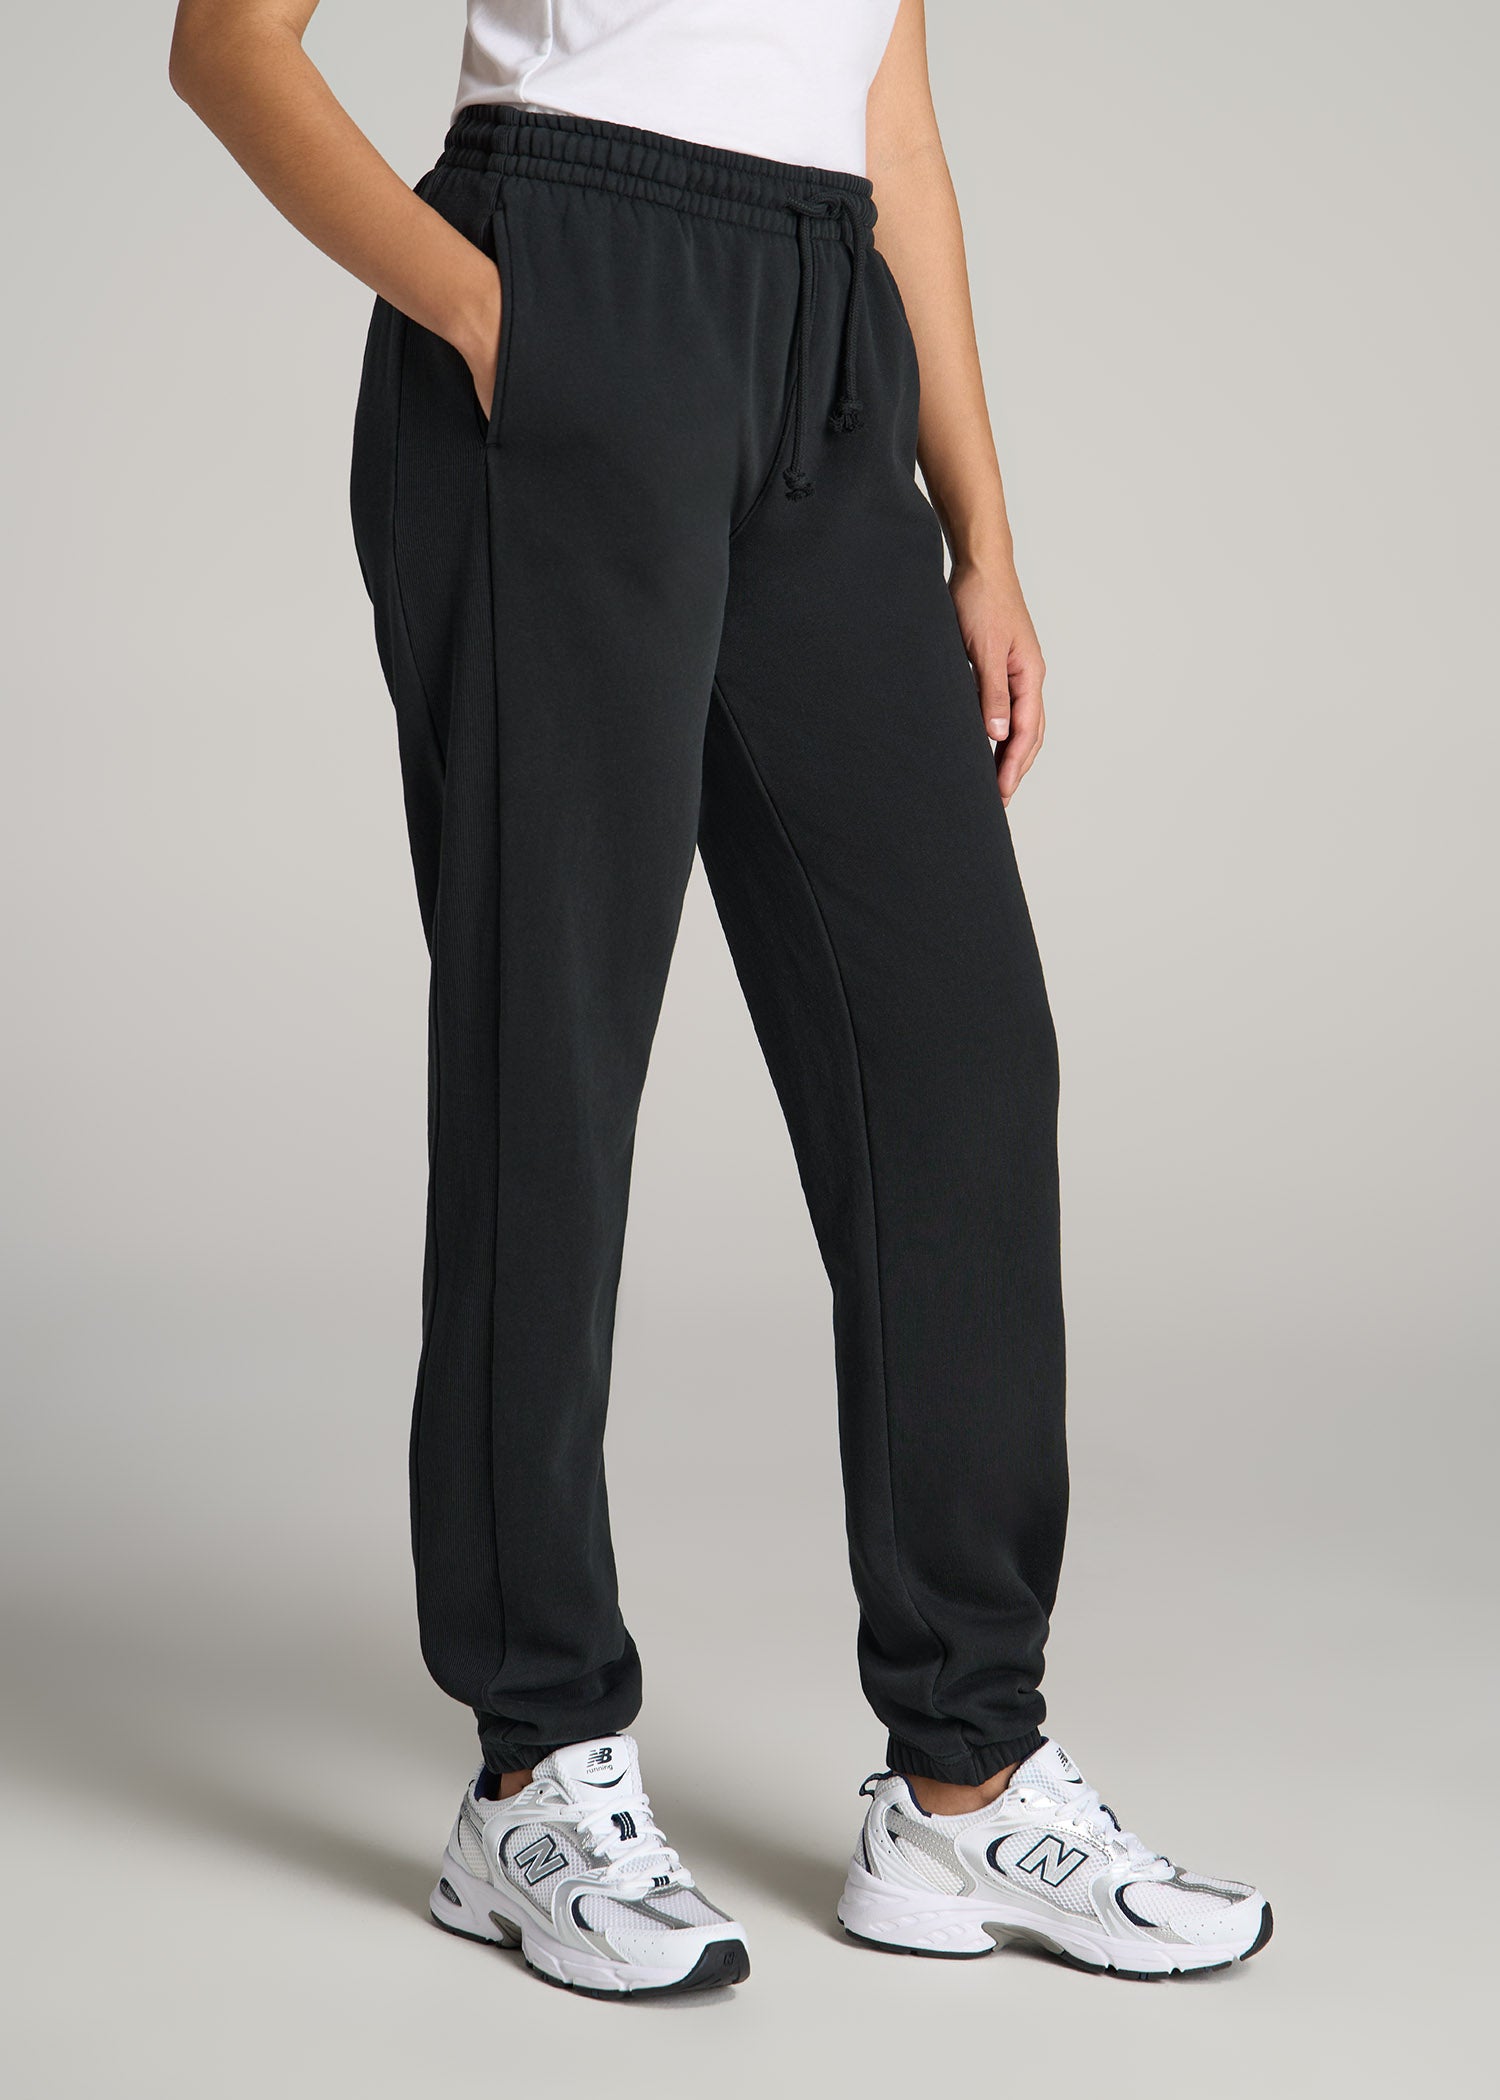 Workout Clothes for Tall Women - Women's Sweatpants Tall Sizes – American  Tall